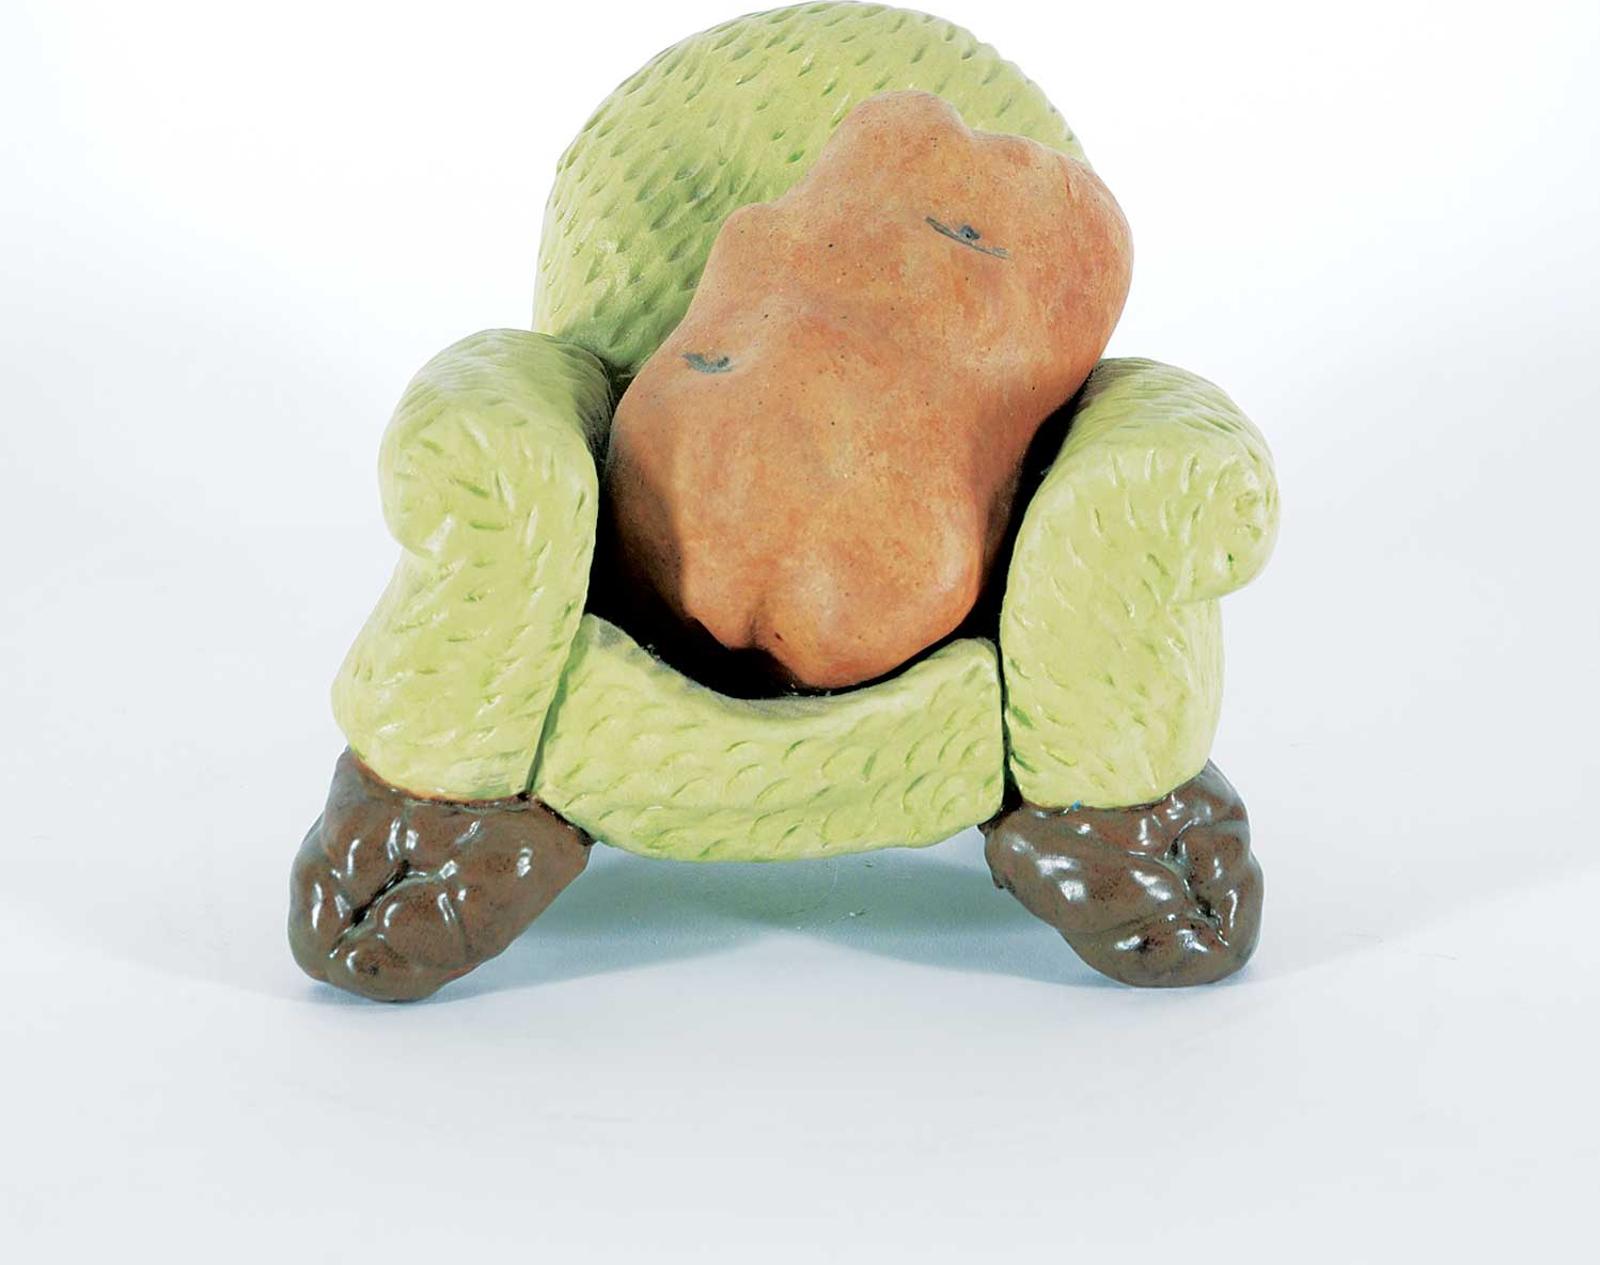 Victor Cicansky (1935) - Untitled - Couch Potato